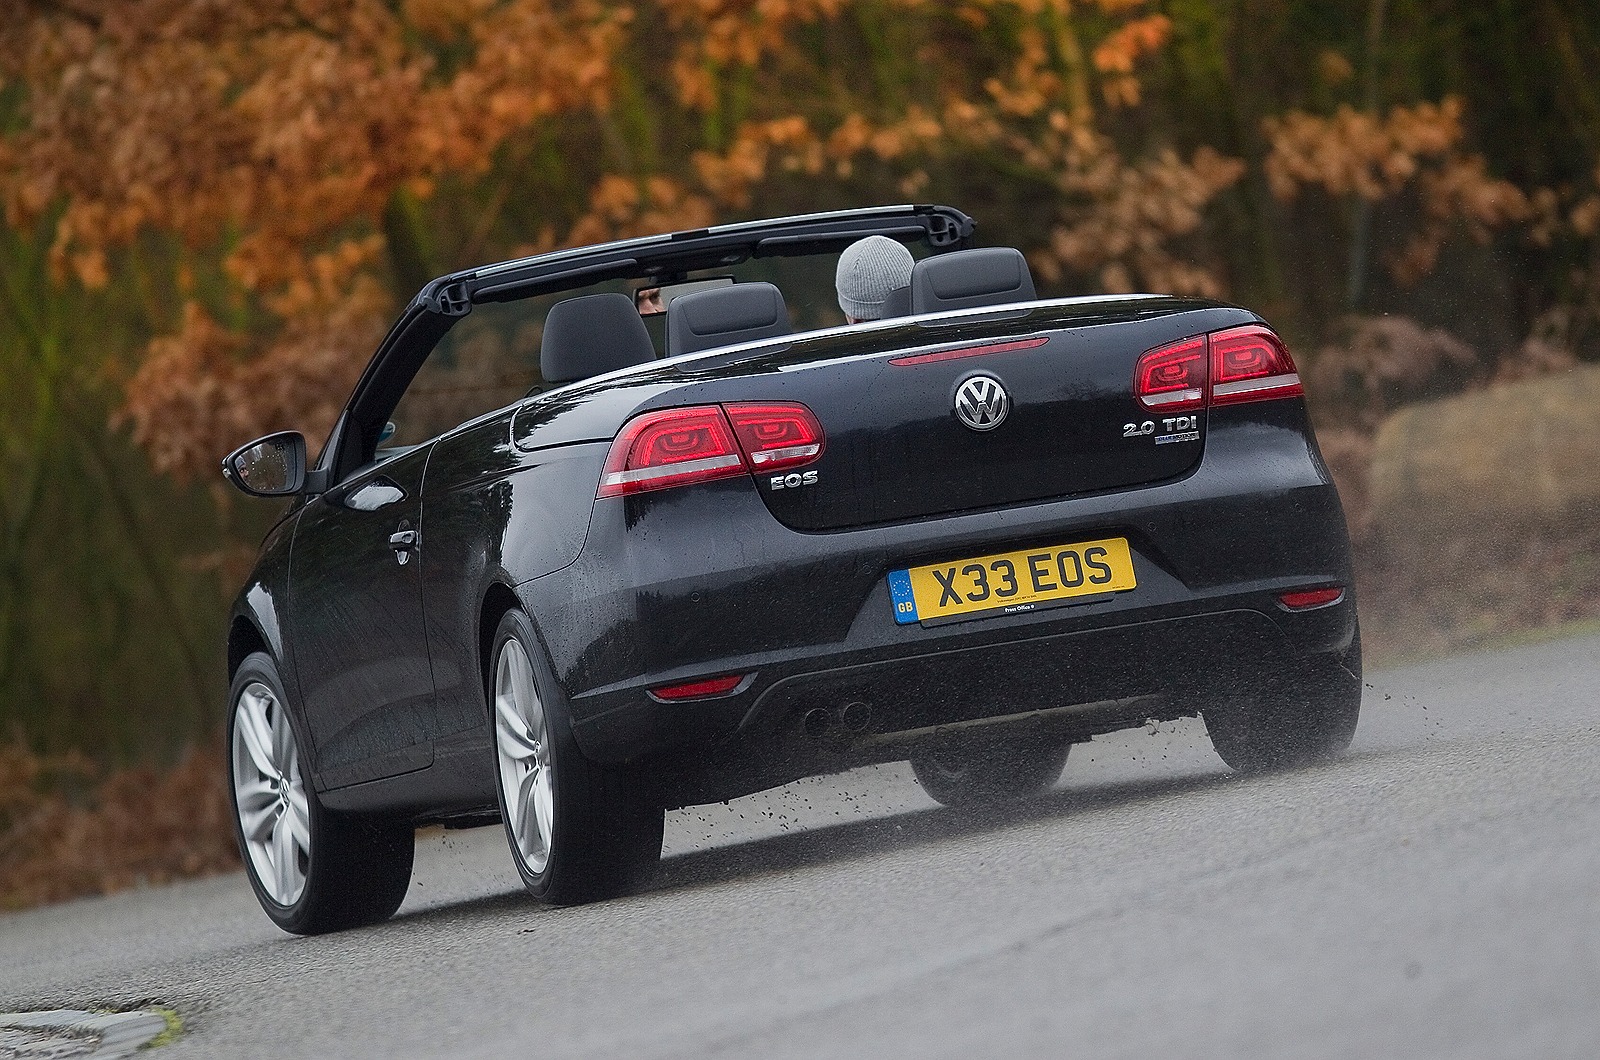 Used Volkswagen Eos 2006-2014 review